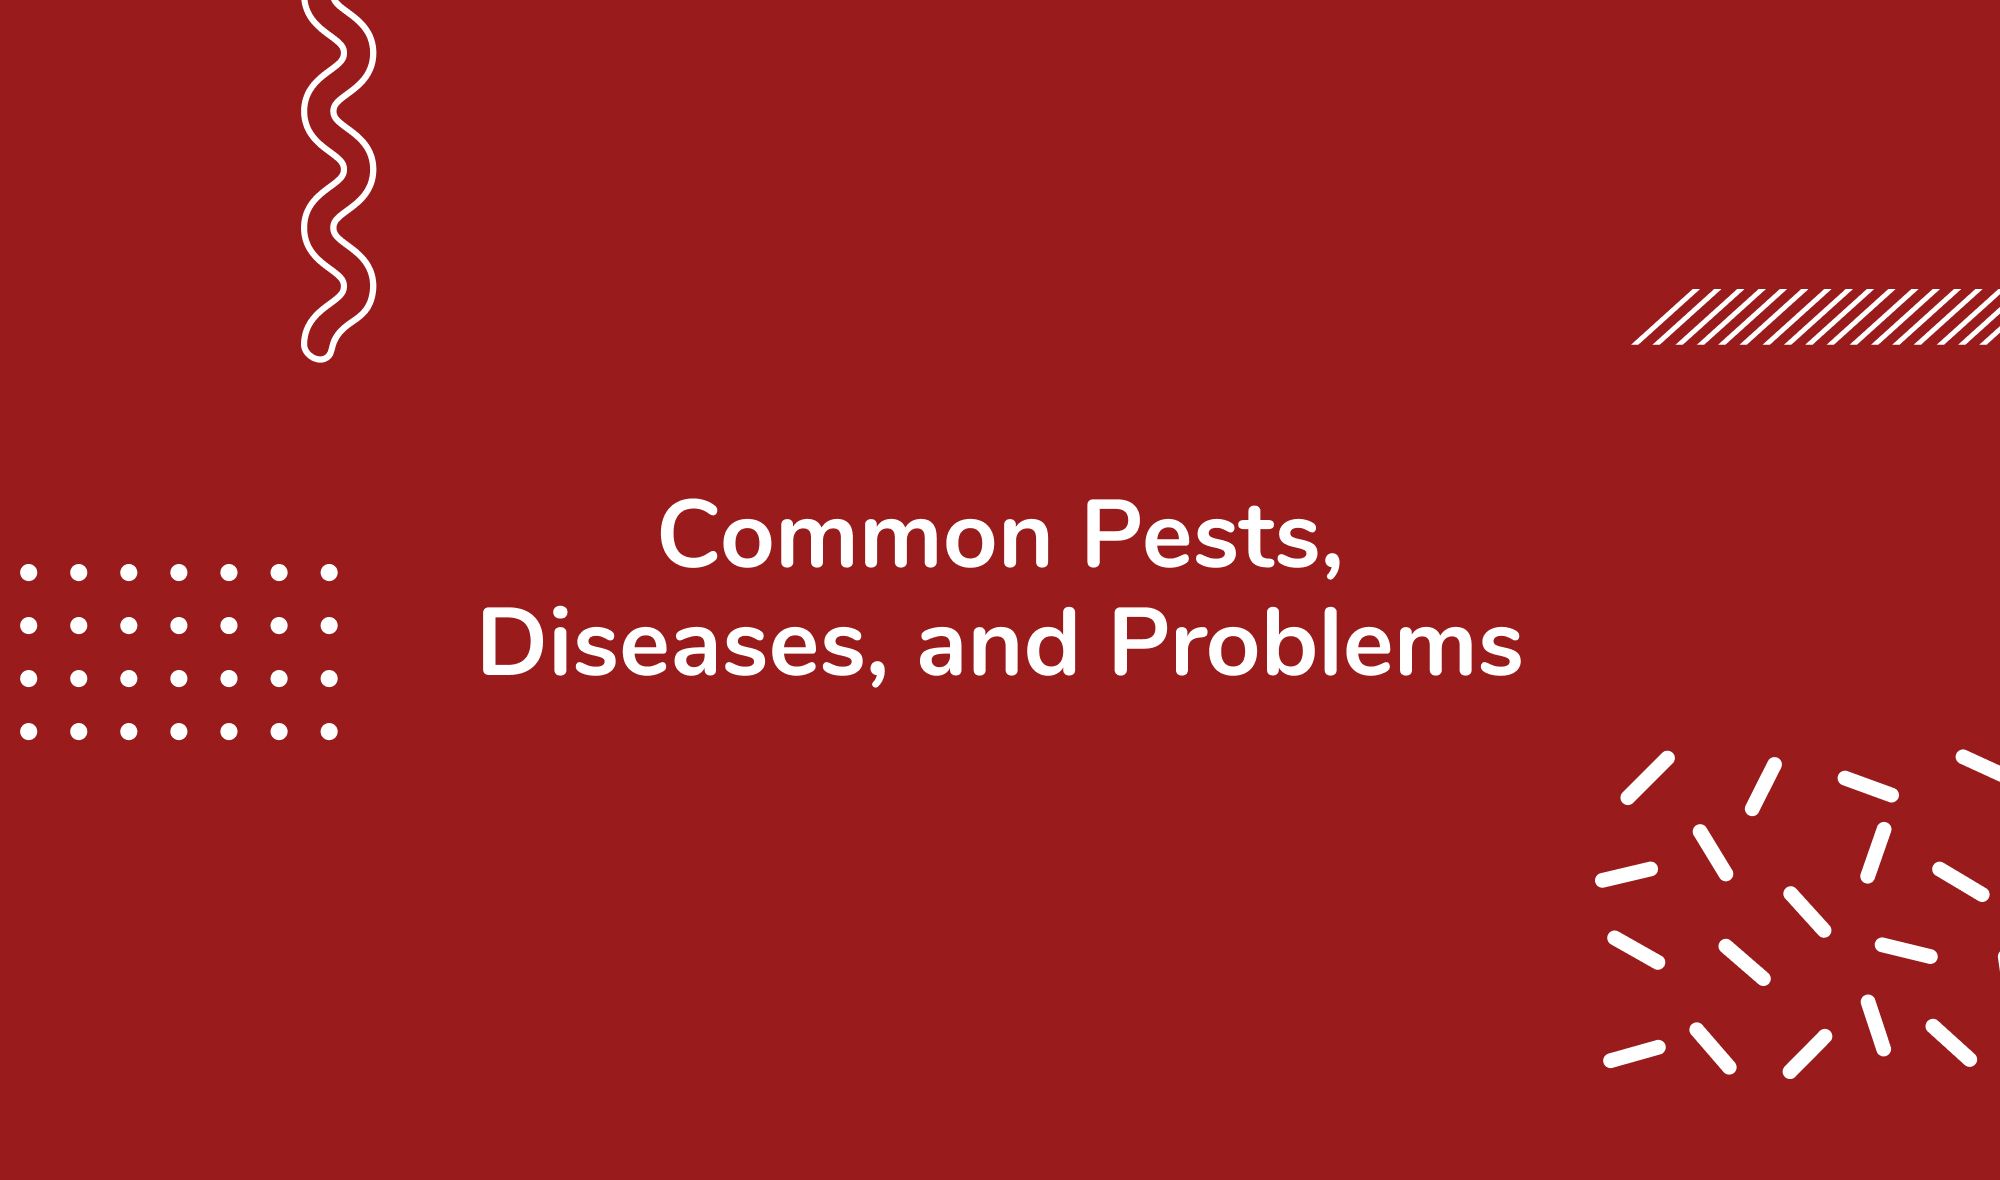 Common Pests, Diseases, and Problems